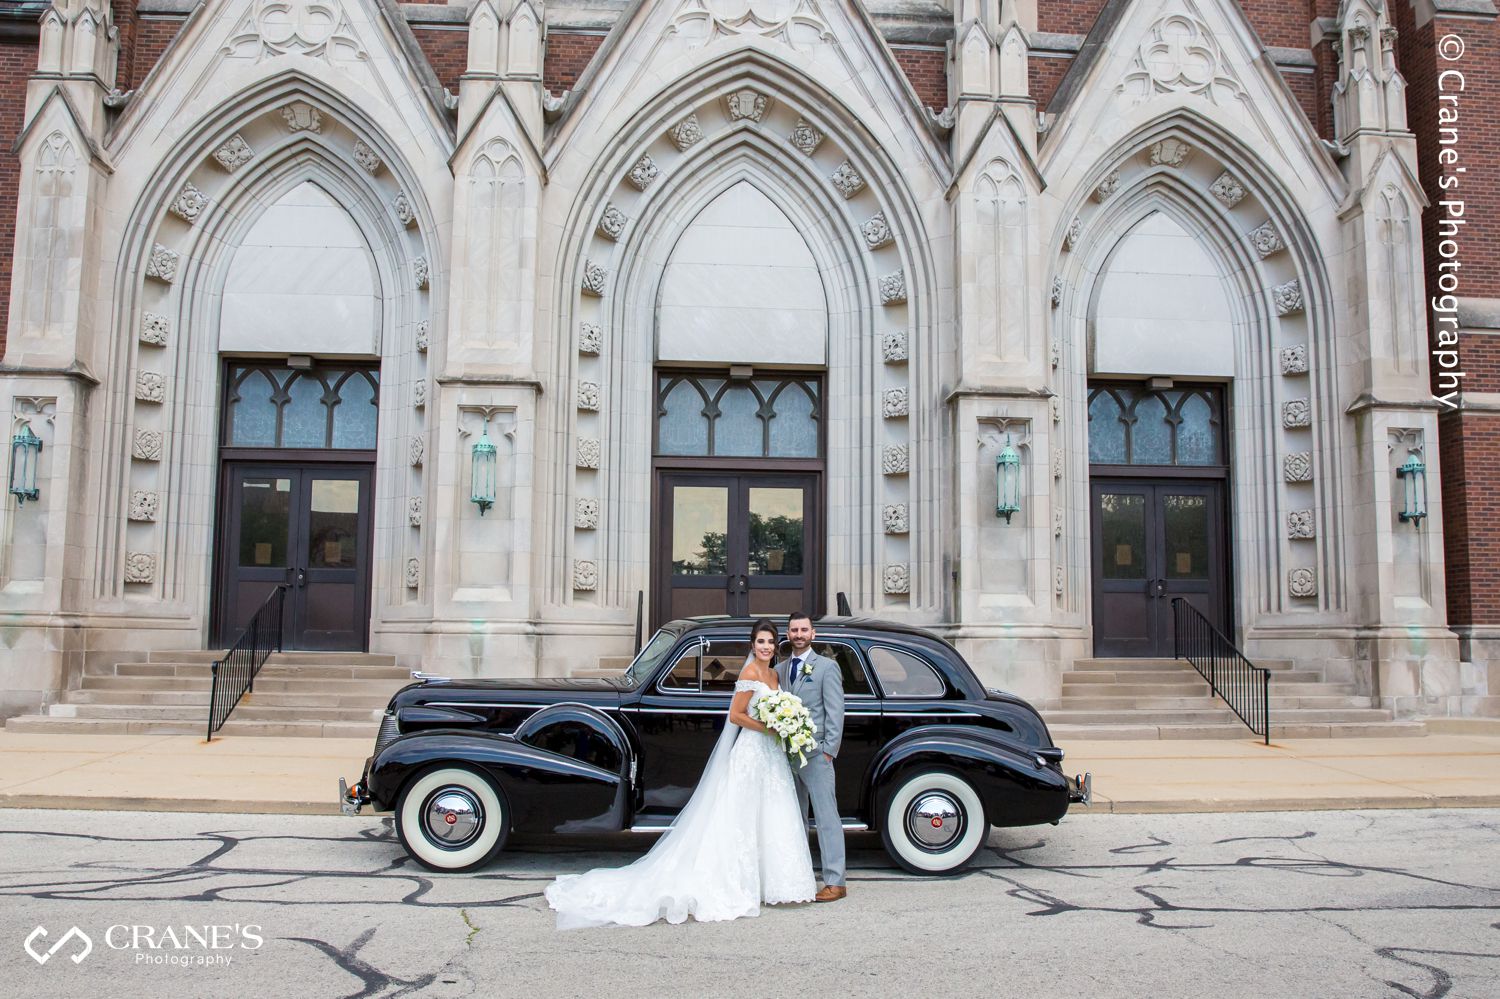 A portrait of a bride and groom with a vintage car in front of St. Peter and Paul Church in Naperville